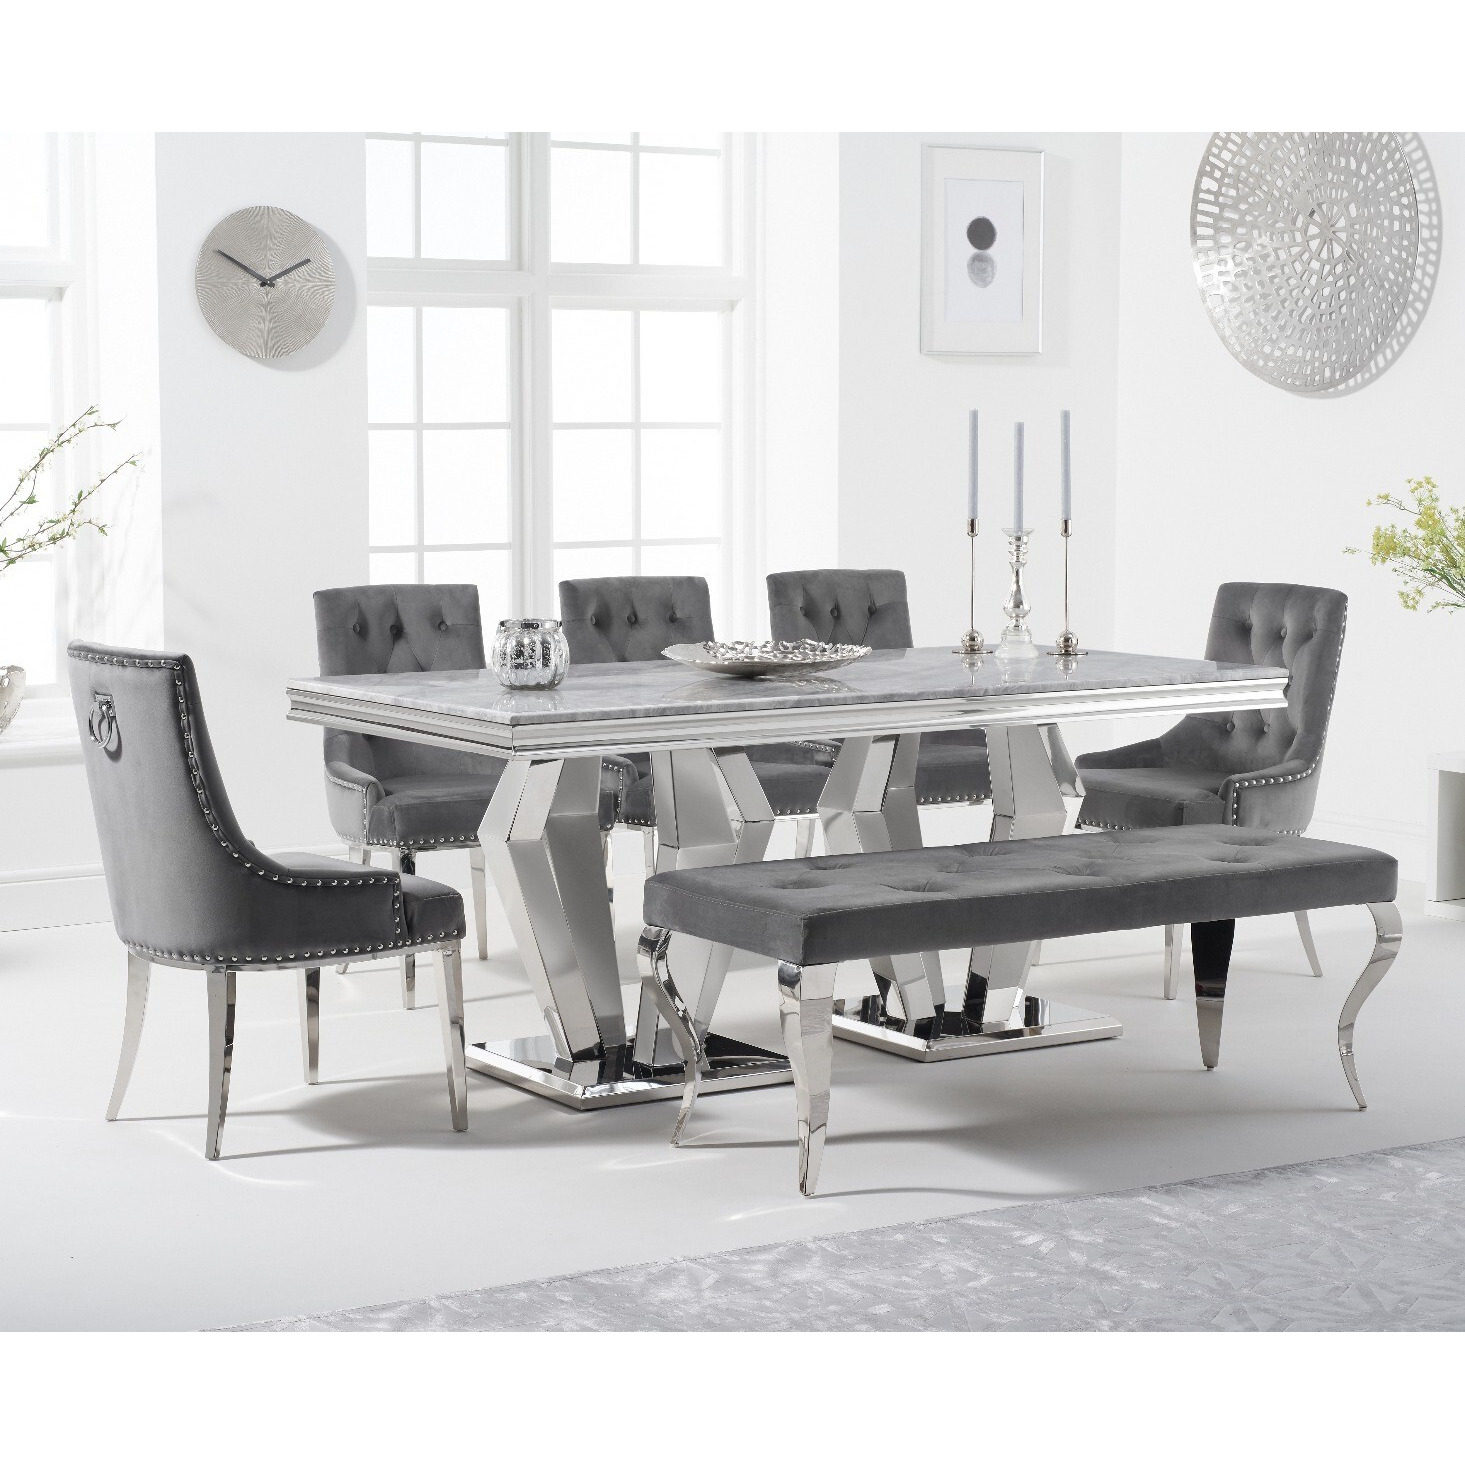 Viscount 180cm Marble Dining Table with Talia Velvet Chairs and Grey Fitzrovia Bench - Grey, 2 Chairs